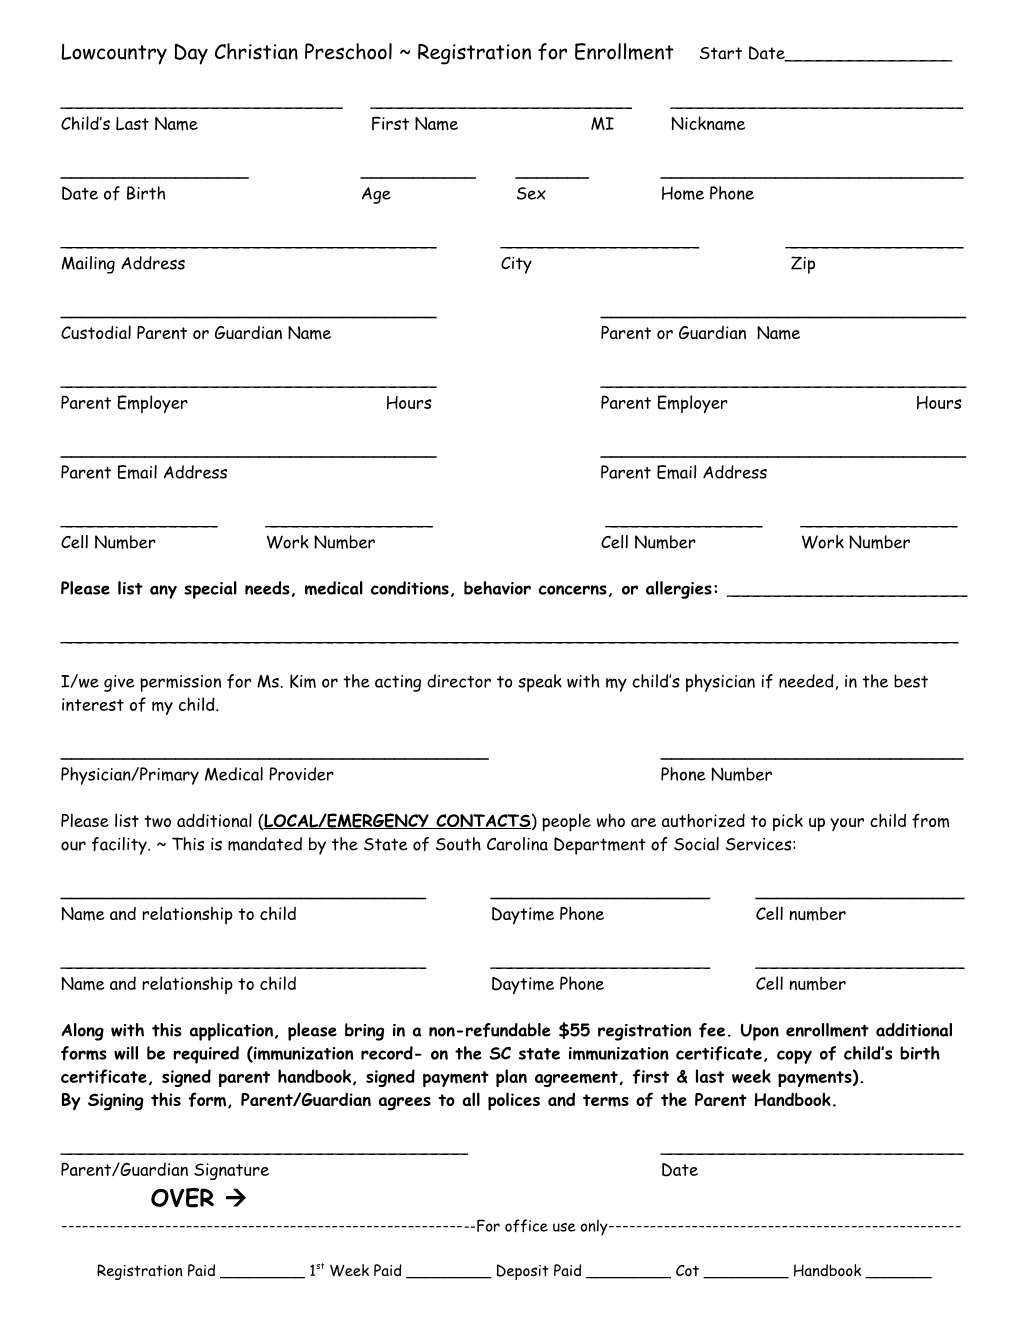 Lowcountry Day Registration/Enrollment Questionaire